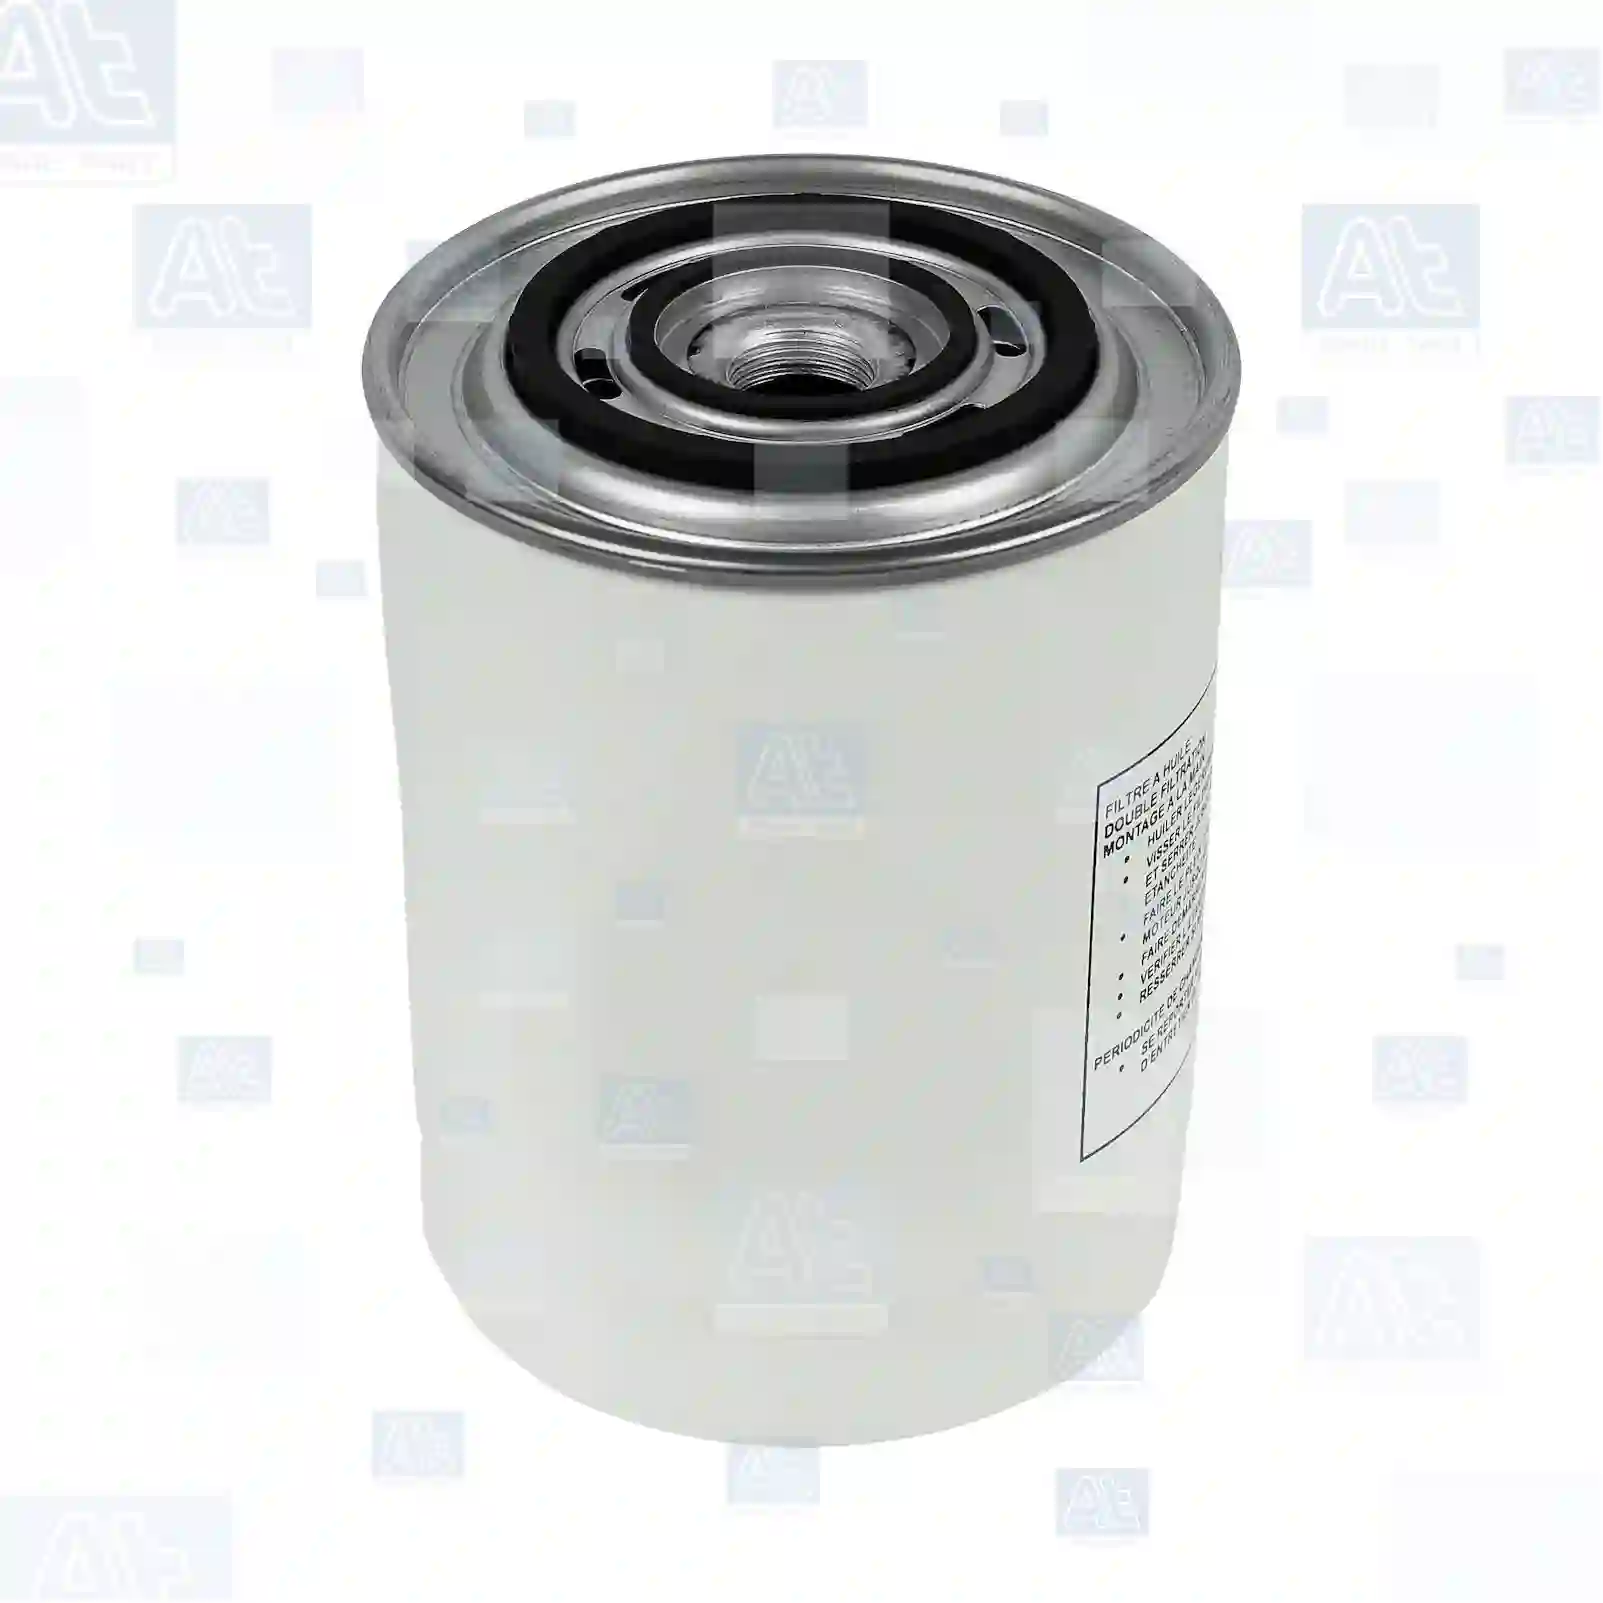 Oil filter, 77700870, 1931047, LF0348100, 9110665, 1109AQ, 1109J3, 1109P5, 1109P6, 1109Q0, 1109Q1, 1109Q4, 1109Y7, 1109Y8, 01831118, 01900823, 01902047, 01902076, 01902847, 01903628, 01903785, 01907580, 01907582, 01907583, 01930213, 01930823, 01931047, 04787410, 04791113, 05983900, 07301916, 07301939, 07571569, 1902047, 71713782, 71718765, 71734217, 71736163, 71739633, 71739634, 71753740, 71771361, 71930213, 74787410, 74791113, 77301939, 98432648, 98432651, 98472349, 5025089, 5025091, 9110665, 9110665, L01930213, 01303628, 01900823, 01902047, 01902076, 01902847, 01903628, 01903784, 01903785, 01907580, 01907582, 01907583, 01930213, 01930823, 02994057, 04787410, 04791113, 04796458, 04799425, 05983900, 07301916, 07301939, 07571569, 11907580, 1902047, 1902076, 1902847, 1903628, 1907582, 1907583, 2994057, 500038747, 500322701, 5001857493, 98432648, 98472349, 04787410, 05983900, 07301916, 07571569, 71713782, 71718765, 71734217, 71736163, 71739633, 71739634, 71753740, 71771361, 98432648, 98432651, 01931047, LF0348100, 1109AQ, 1109J3, 1109P5, 1109P6, 1109Q0, 1109Q1, 1109Q4, 1109Y7, 1109Y8, 5000816070, 5010816070, 6005021225, 7701035650, 1931047, ZG01712-0008 ||  77700870 At Spare Part | Engine, Accelerator Pedal, Camshaft, Connecting Rod, Crankcase, Crankshaft, Cylinder Head, Engine Suspension Mountings, Exhaust Manifold, Exhaust Gas Recirculation, Filter Kits, Flywheel Housing, General Overhaul Kits, Engine, Intake Manifold, Oil Cleaner, Oil Cooler, Oil Filter, Oil Pump, Oil Sump, Piston & Liner, Sensor & Switch, Timing Case, Turbocharger, Cooling System, Belt Tensioner, Coolant Filter, Coolant Pipe, Corrosion Prevention Agent, Drive, Expansion Tank, Fan, Intercooler, Monitors & Gauges, Radiator, Thermostat, V-Belt / Timing belt, Water Pump, Fuel System, Electronical Injector Unit, Feed Pump, Fuel Filter, cpl., Fuel Gauge Sender,  Fuel Line, Fuel Pump, Fuel Tank, Injection Line Kit, Injection Pump, Exhaust System, Clutch & Pedal, Gearbox, Propeller Shaft, Axles, Brake System, Hubs & Wheels, Suspension, Leaf Spring, Universal Parts / Accessories, Steering, Electrical System, Cabin Oil filter, 77700870, 1931047, LF0348100, 9110665, 1109AQ, 1109J3, 1109P5, 1109P6, 1109Q0, 1109Q1, 1109Q4, 1109Y7, 1109Y8, 01831118, 01900823, 01902047, 01902076, 01902847, 01903628, 01903785, 01907580, 01907582, 01907583, 01930213, 01930823, 01931047, 04787410, 04791113, 05983900, 07301916, 07301939, 07571569, 1902047, 71713782, 71718765, 71734217, 71736163, 71739633, 71739634, 71753740, 71771361, 71930213, 74787410, 74791113, 77301939, 98432648, 98432651, 98472349, 5025089, 5025091, 9110665, 9110665, L01930213, 01303628, 01900823, 01902047, 01902076, 01902847, 01903628, 01903784, 01903785, 01907580, 01907582, 01907583, 01930213, 01930823, 02994057, 04787410, 04791113, 04796458, 04799425, 05983900, 07301916, 07301939, 07571569, 11907580, 1902047, 1902076, 1902847, 1903628, 1907582, 1907583, 2994057, 500038747, 500322701, 5001857493, 98432648, 98472349, 04787410, 05983900, 07301916, 07571569, 71713782, 71718765, 71734217, 71736163, 71739633, 71739634, 71753740, 71771361, 98432648, 98432651, 01931047, LF0348100, 1109AQ, 1109J3, 1109P5, 1109P6, 1109Q0, 1109Q1, 1109Q4, 1109Y7, 1109Y8, 5000816070, 5010816070, 6005021225, 7701035650, 1931047, ZG01712-0008 ||  77700870 At Spare Part | Engine, Accelerator Pedal, Camshaft, Connecting Rod, Crankcase, Crankshaft, Cylinder Head, Engine Suspension Mountings, Exhaust Manifold, Exhaust Gas Recirculation, Filter Kits, Flywheel Housing, General Overhaul Kits, Engine, Intake Manifold, Oil Cleaner, Oil Cooler, Oil Filter, Oil Pump, Oil Sump, Piston & Liner, Sensor & Switch, Timing Case, Turbocharger, Cooling System, Belt Tensioner, Coolant Filter, Coolant Pipe, Corrosion Prevention Agent, Drive, Expansion Tank, Fan, Intercooler, Monitors & Gauges, Radiator, Thermostat, V-Belt / Timing belt, Water Pump, Fuel System, Electronical Injector Unit, Feed Pump, Fuel Filter, cpl., Fuel Gauge Sender,  Fuel Line, Fuel Pump, Fuel Tank, Injection Line Kit, Injection Pump, Exhaust System, Clutch & Pedal, Gearbox, Propeller Shaft, Axles, Brake System, Hubs & Wheels, Suspension, Leaf Spring, Universal Parts / Accessories, Steering, Electrical System, Cabin